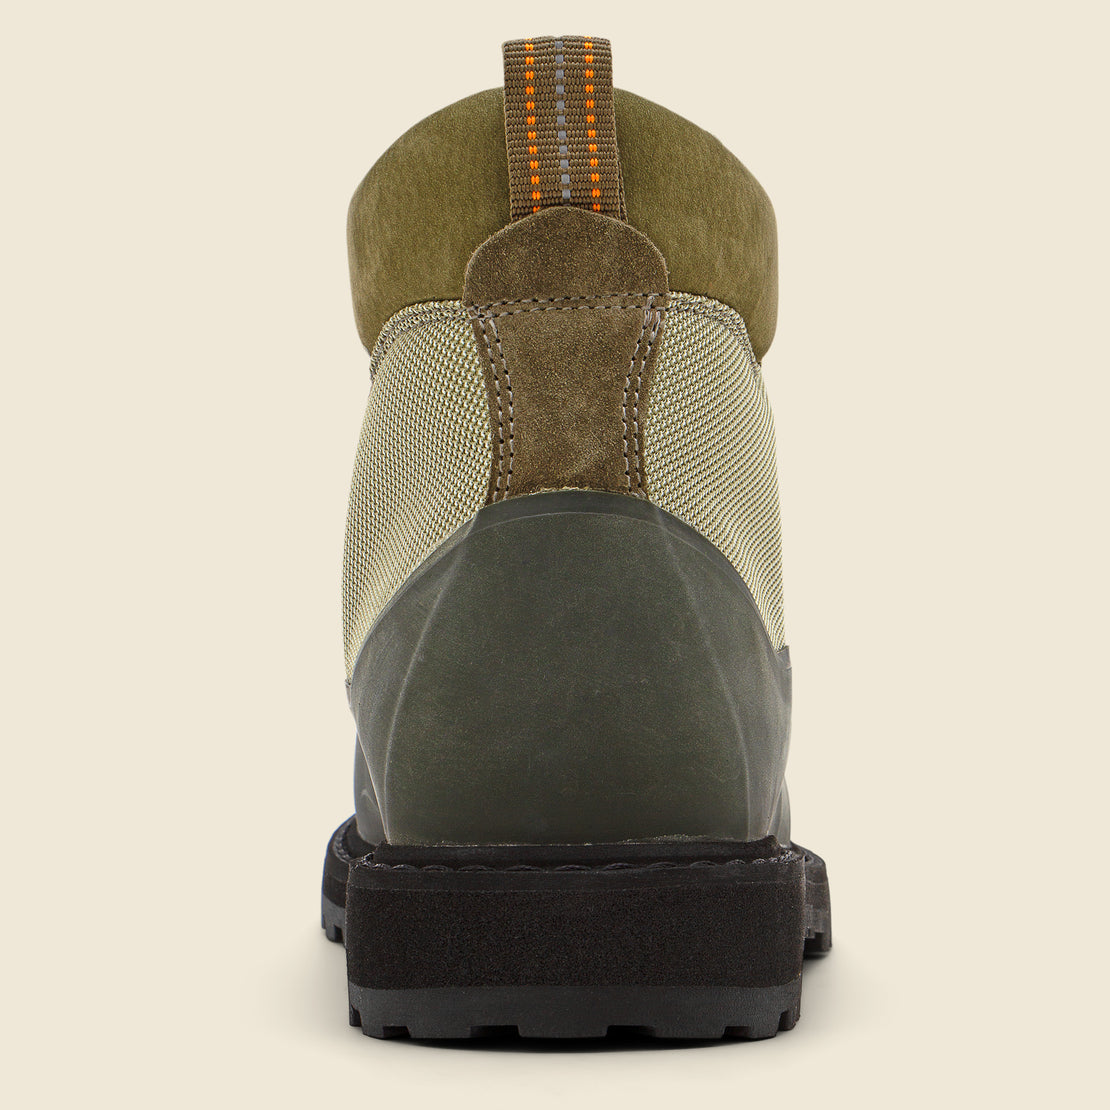 Rocia Vet Sport Hiking Boot - Sage Green - Diemme - STAG Provisions - Shoes - Boots / Chukkas